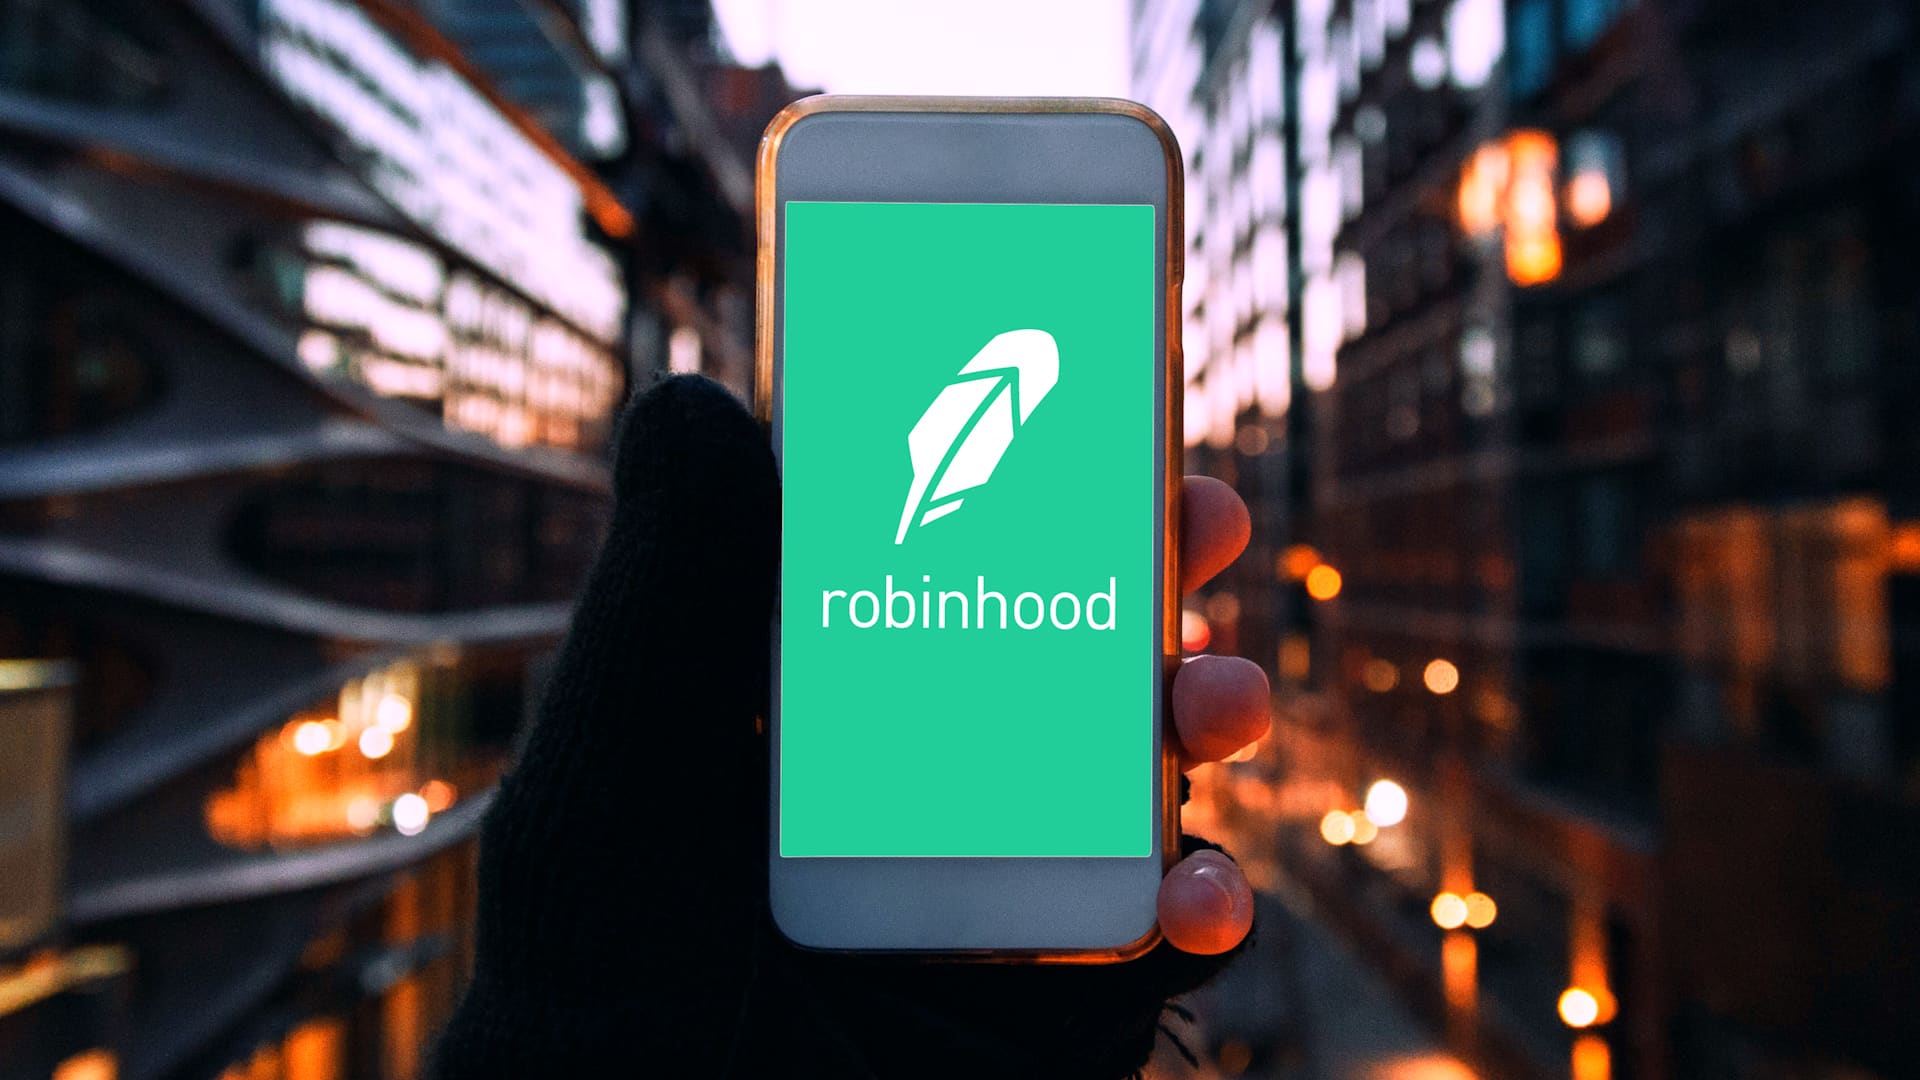 Robinhood To Lay Off 7% of Full-Time Staff In Latest Restructuring